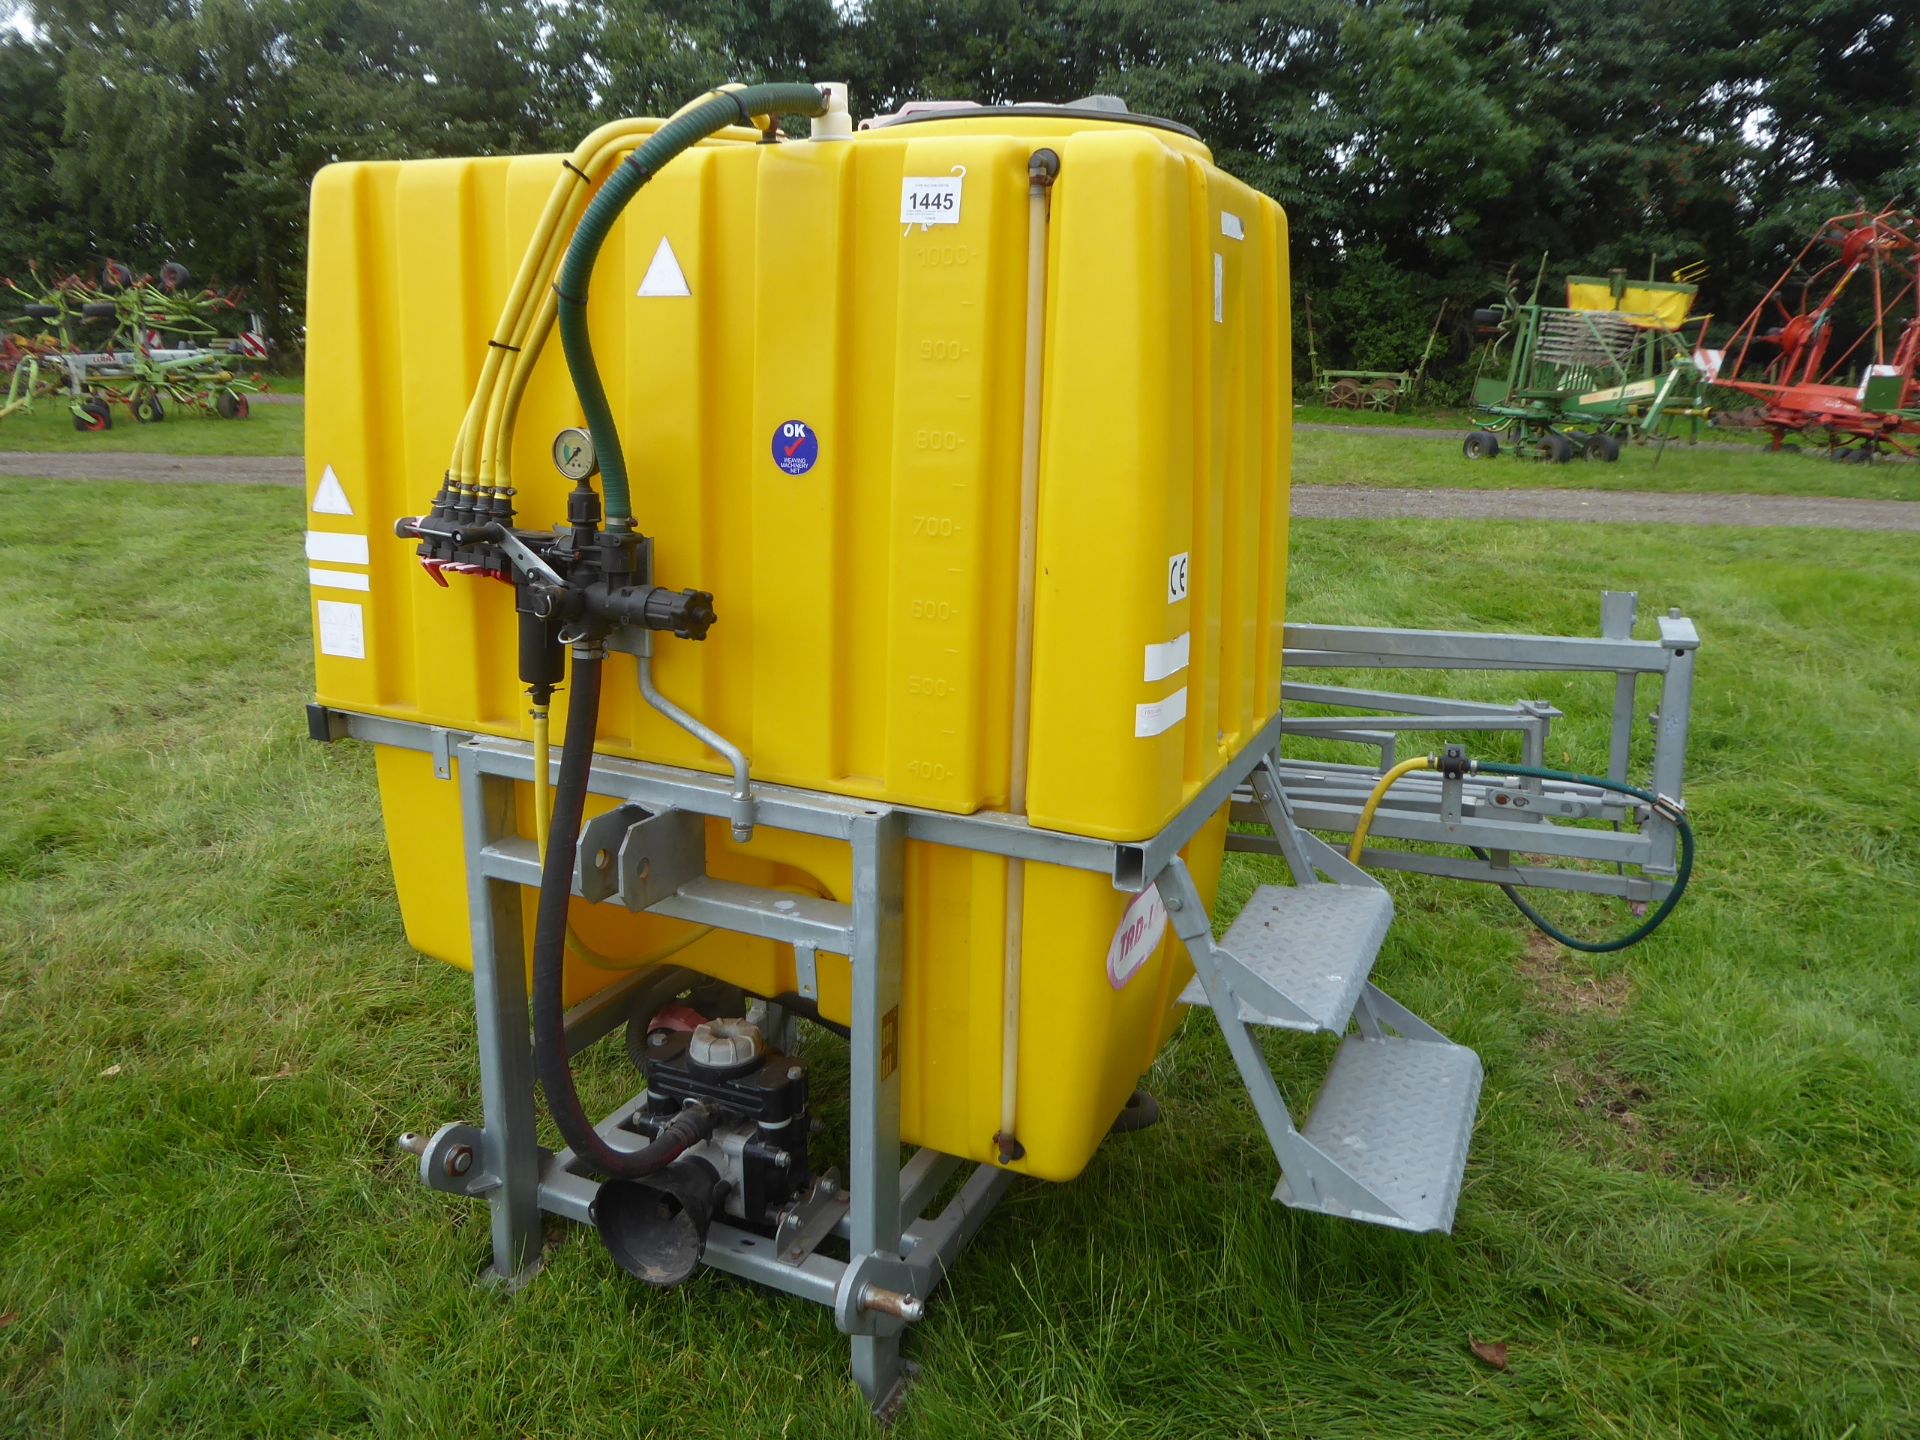 Tadlen 1000ltr crop sprayer with 12m booms, used this season